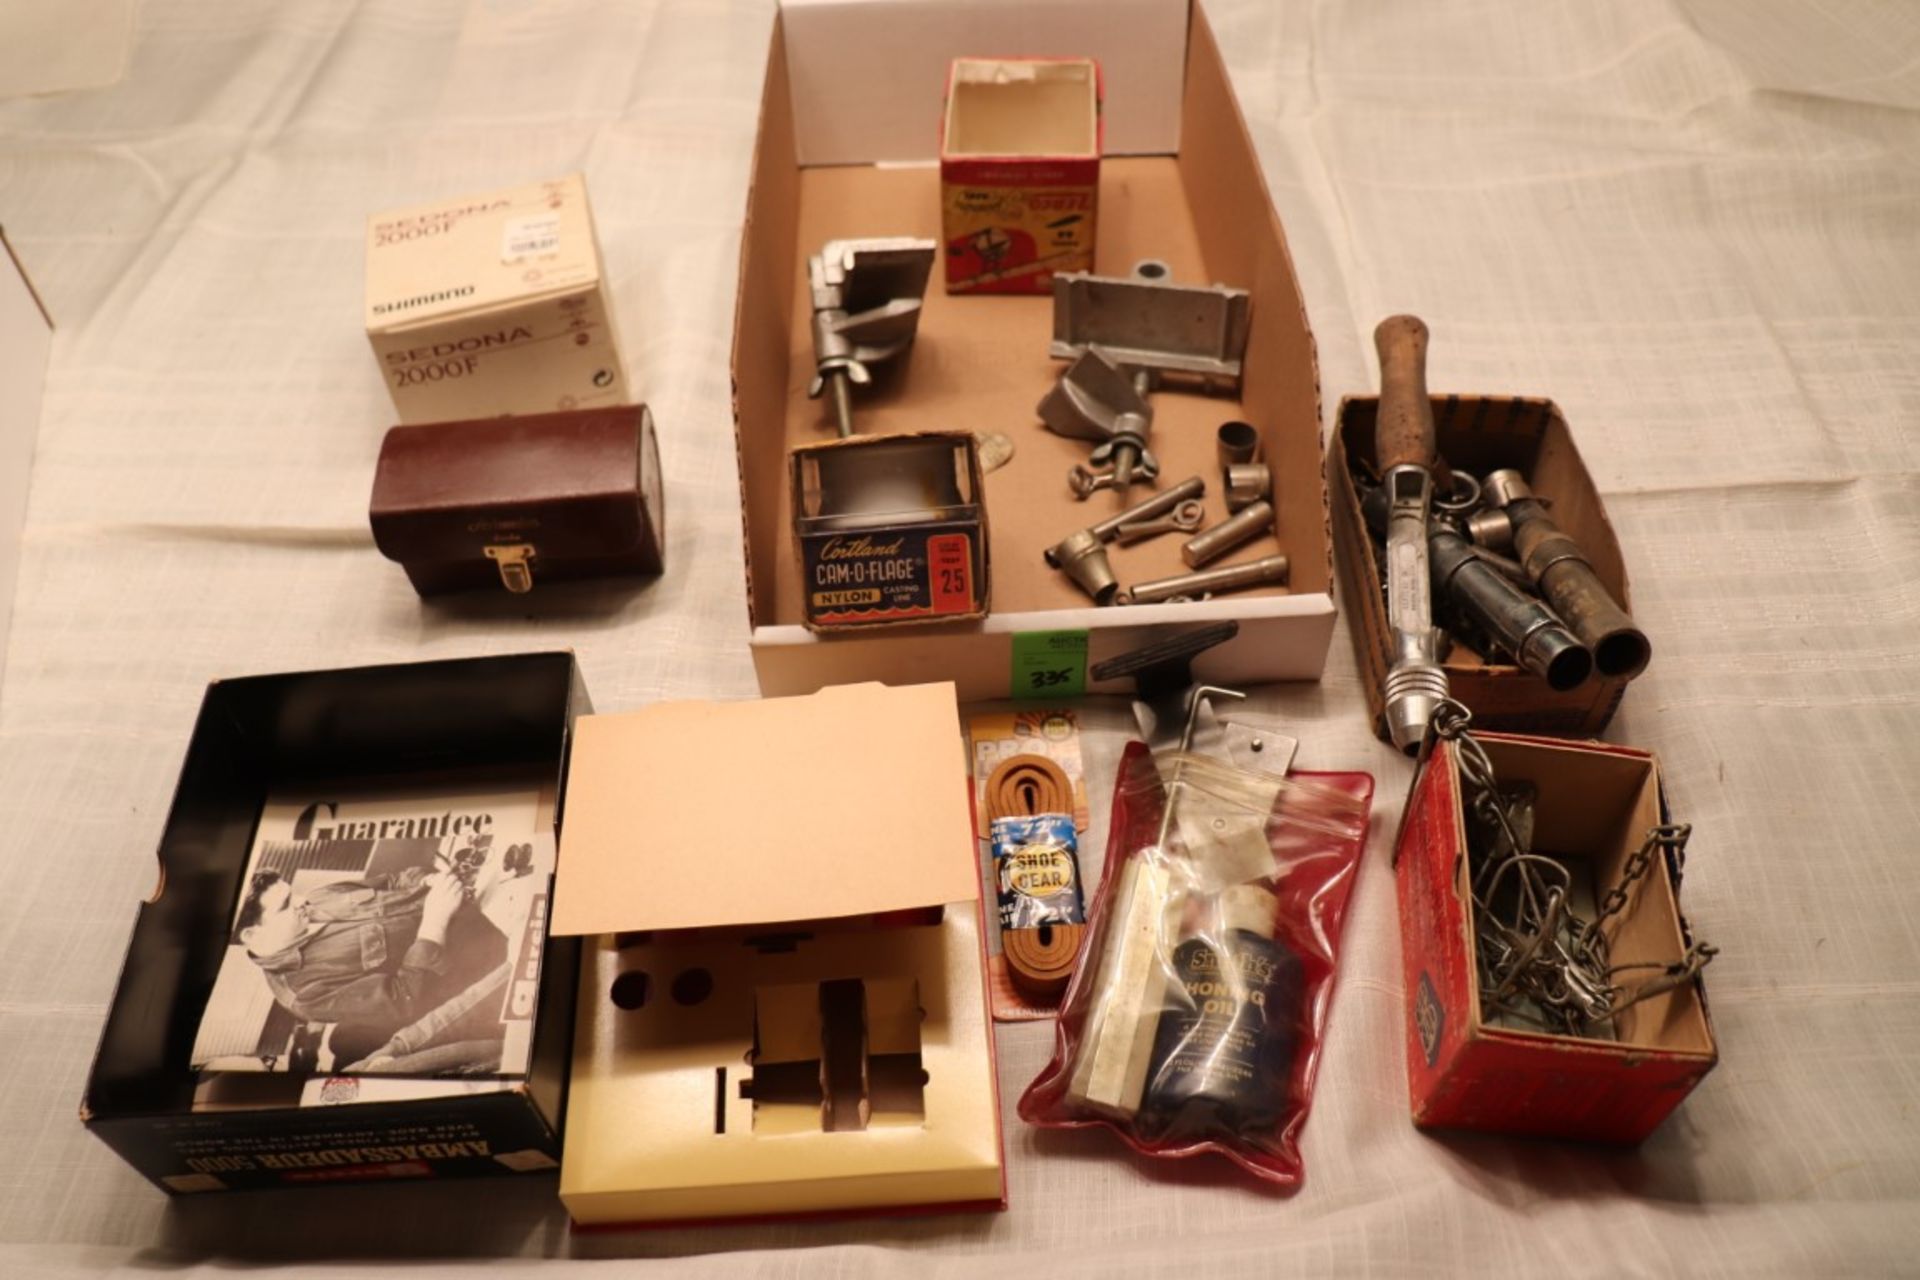 Fishing pole components, empty fishing reel boxes and miscellaneous